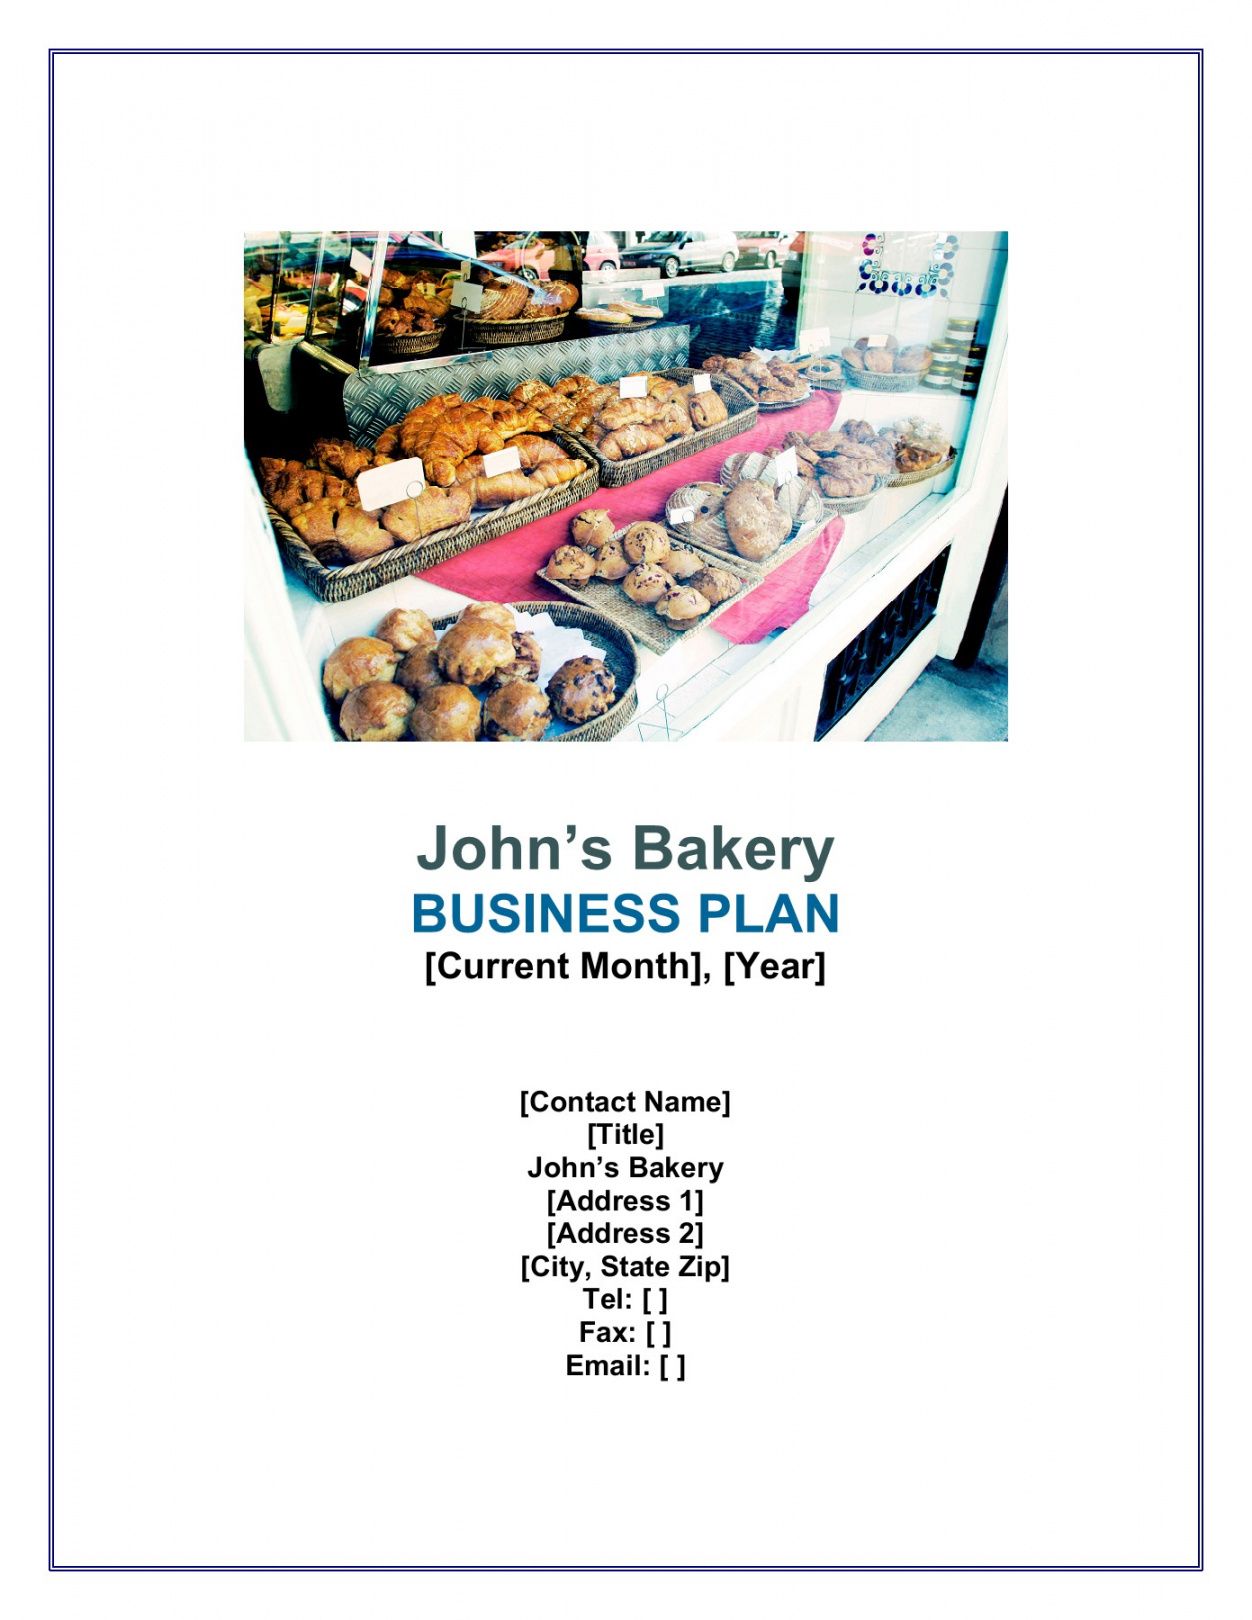 business plan proposal for bakery